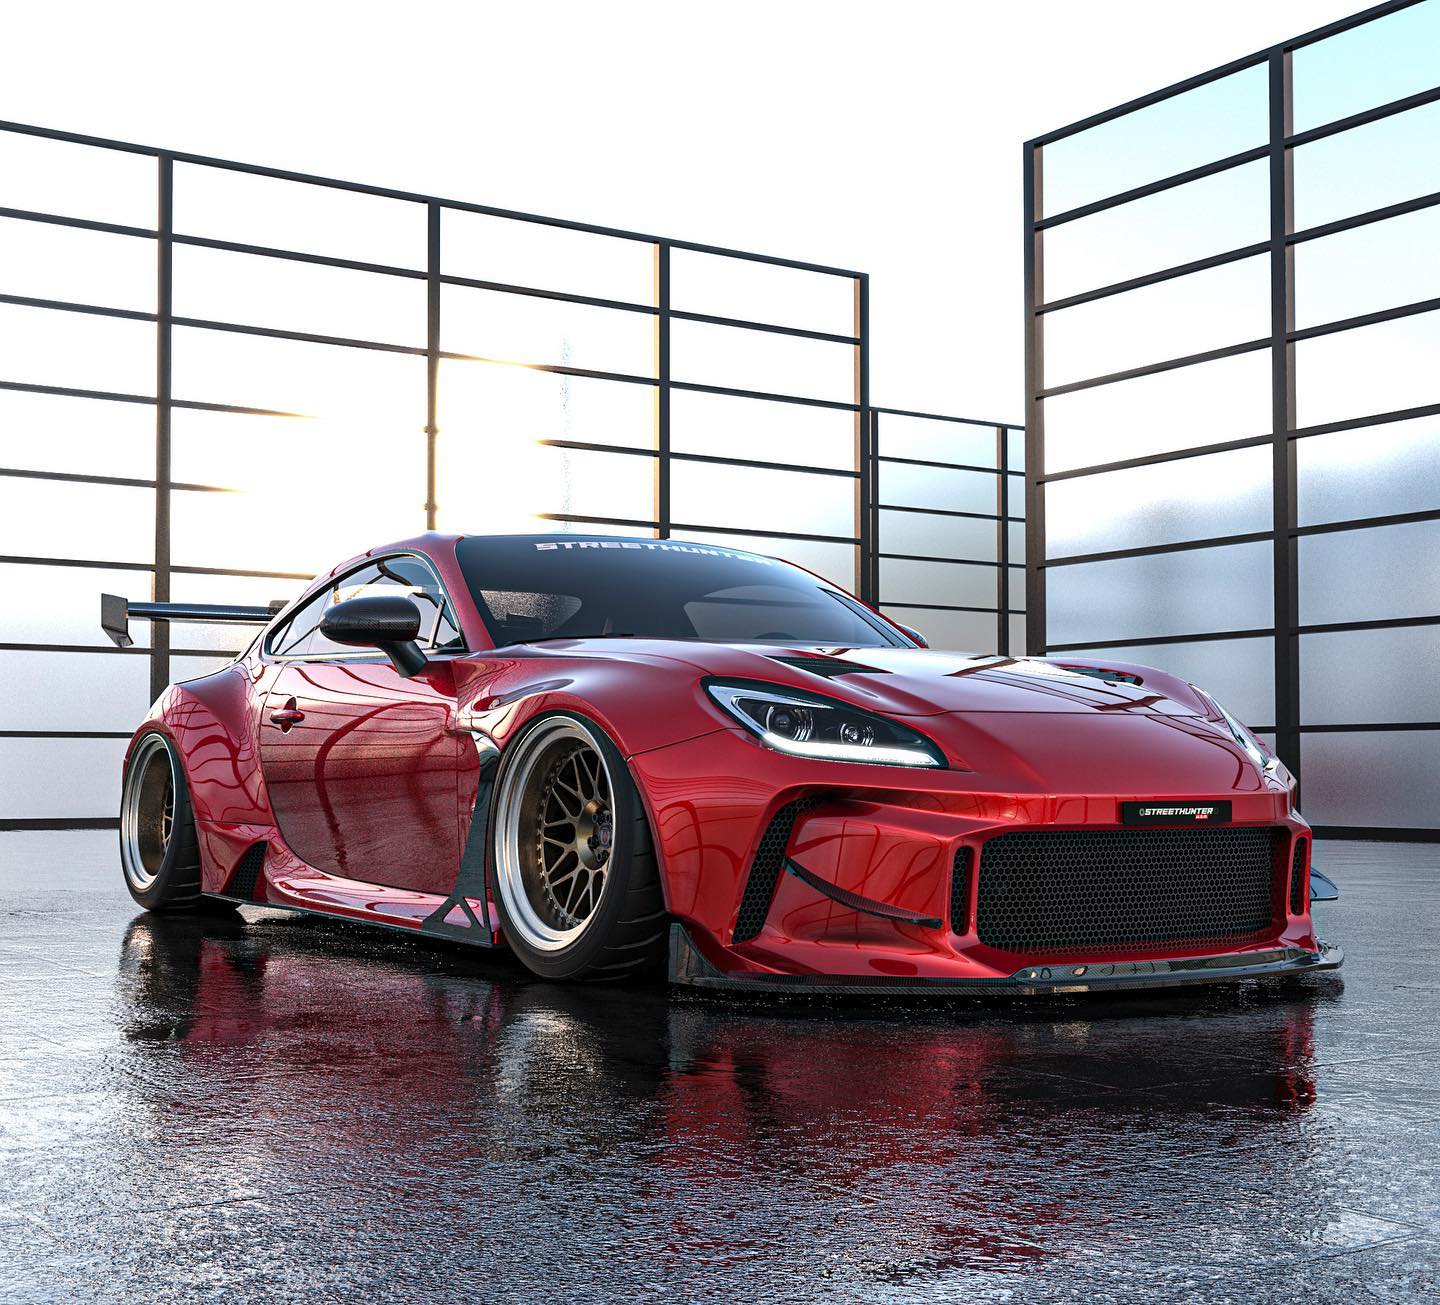 Check Out The Full Brz And Gr86 Widebody Kit By Streethunter Designs ...